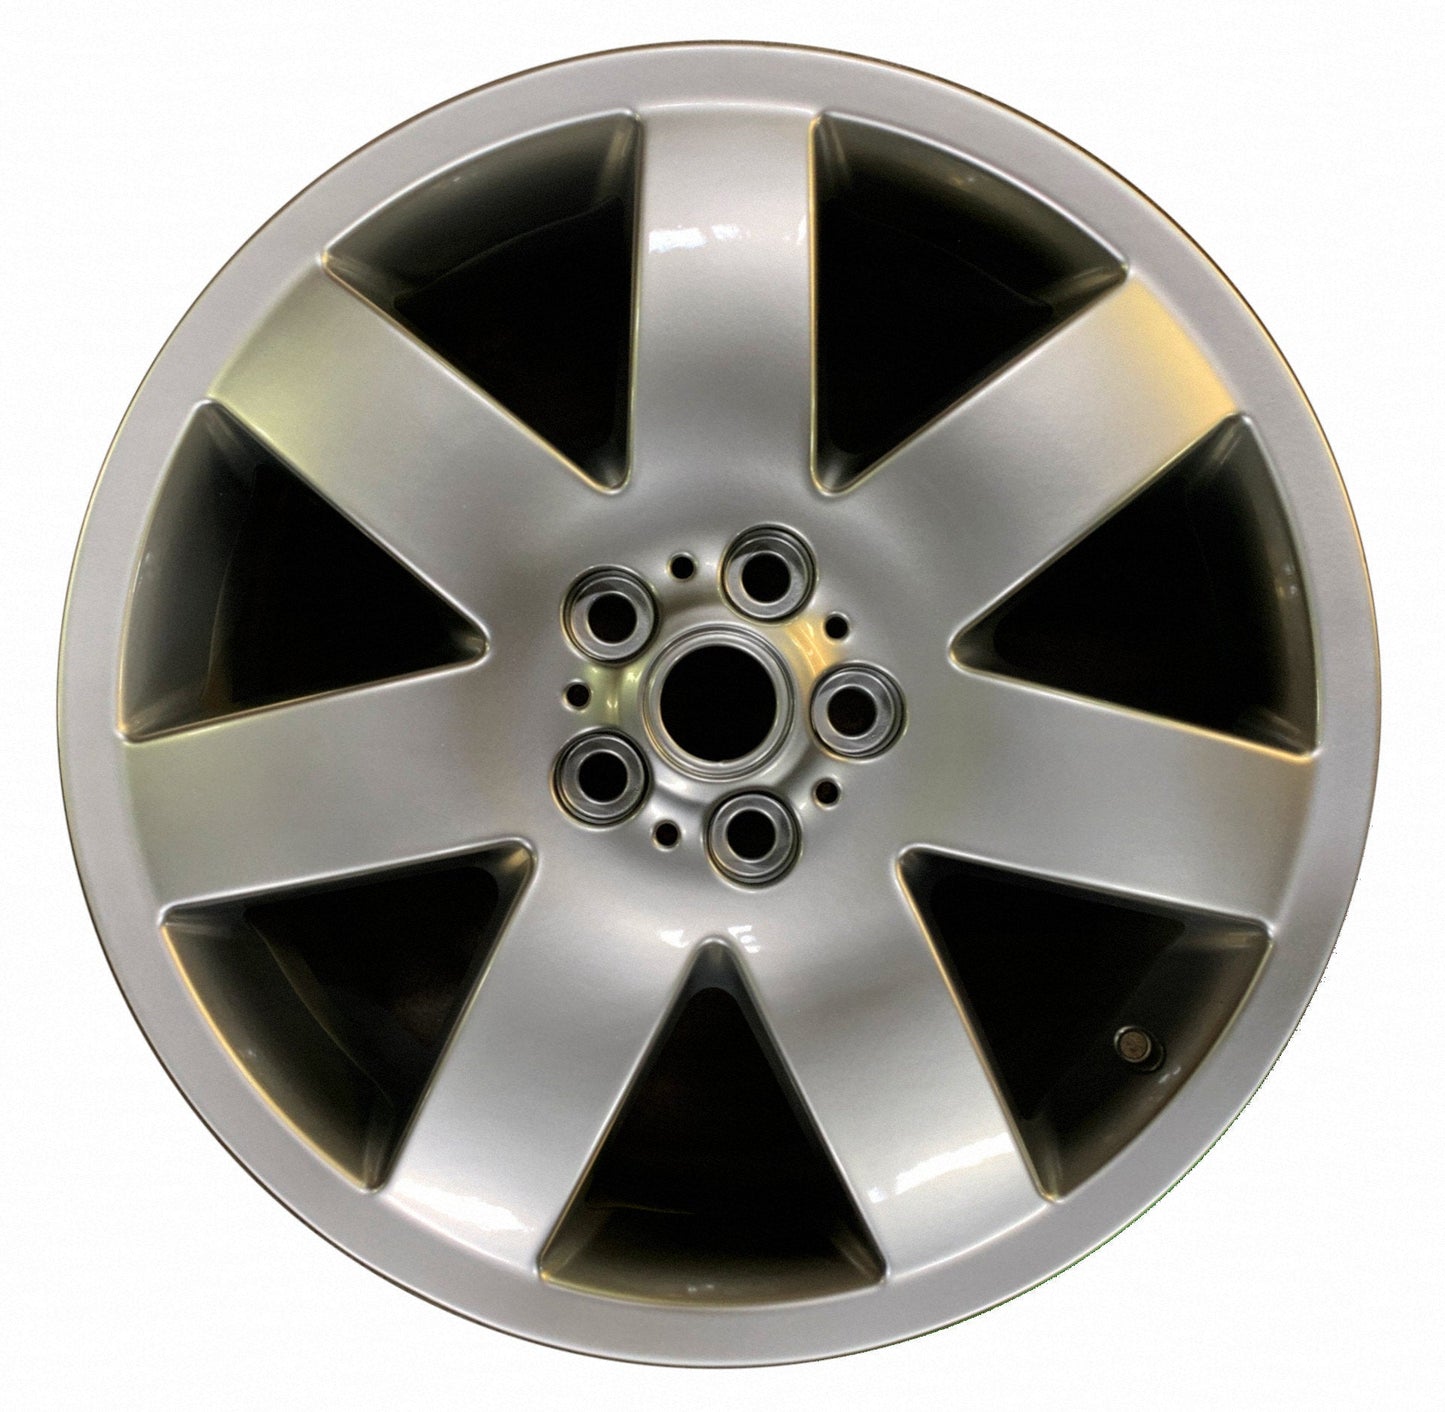 Land Rover Range Rover  2006, 2007, 2008, 2009 Factory OEM Car Wheel Size 20x8.5 Alloy WAO.72199.HYPV6.FF